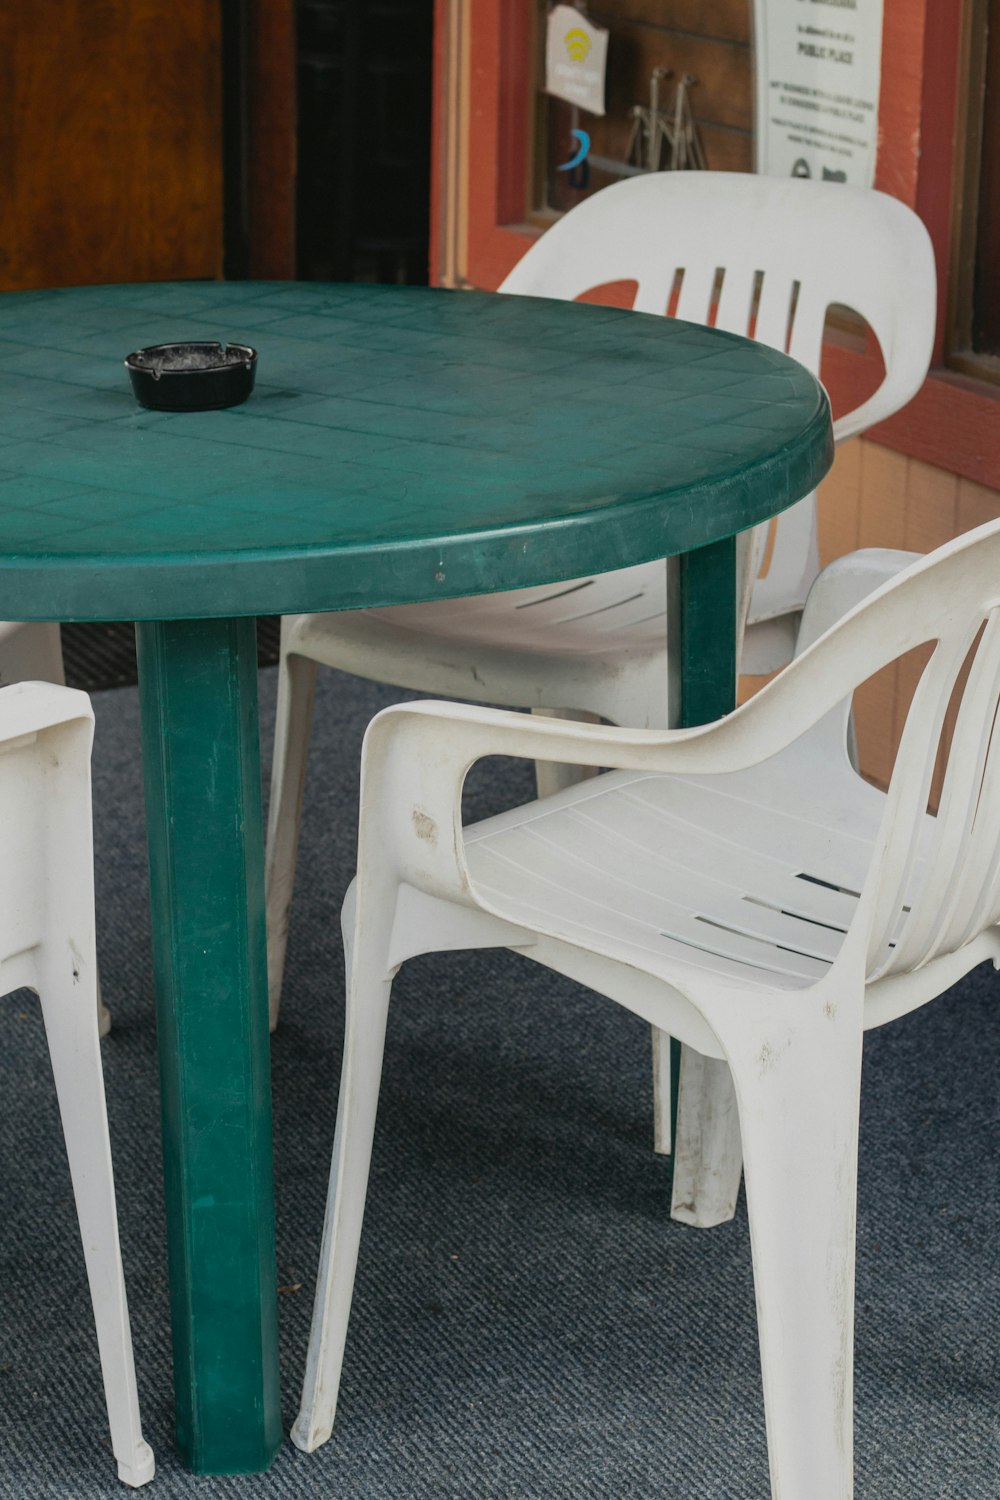 black round plate on green table